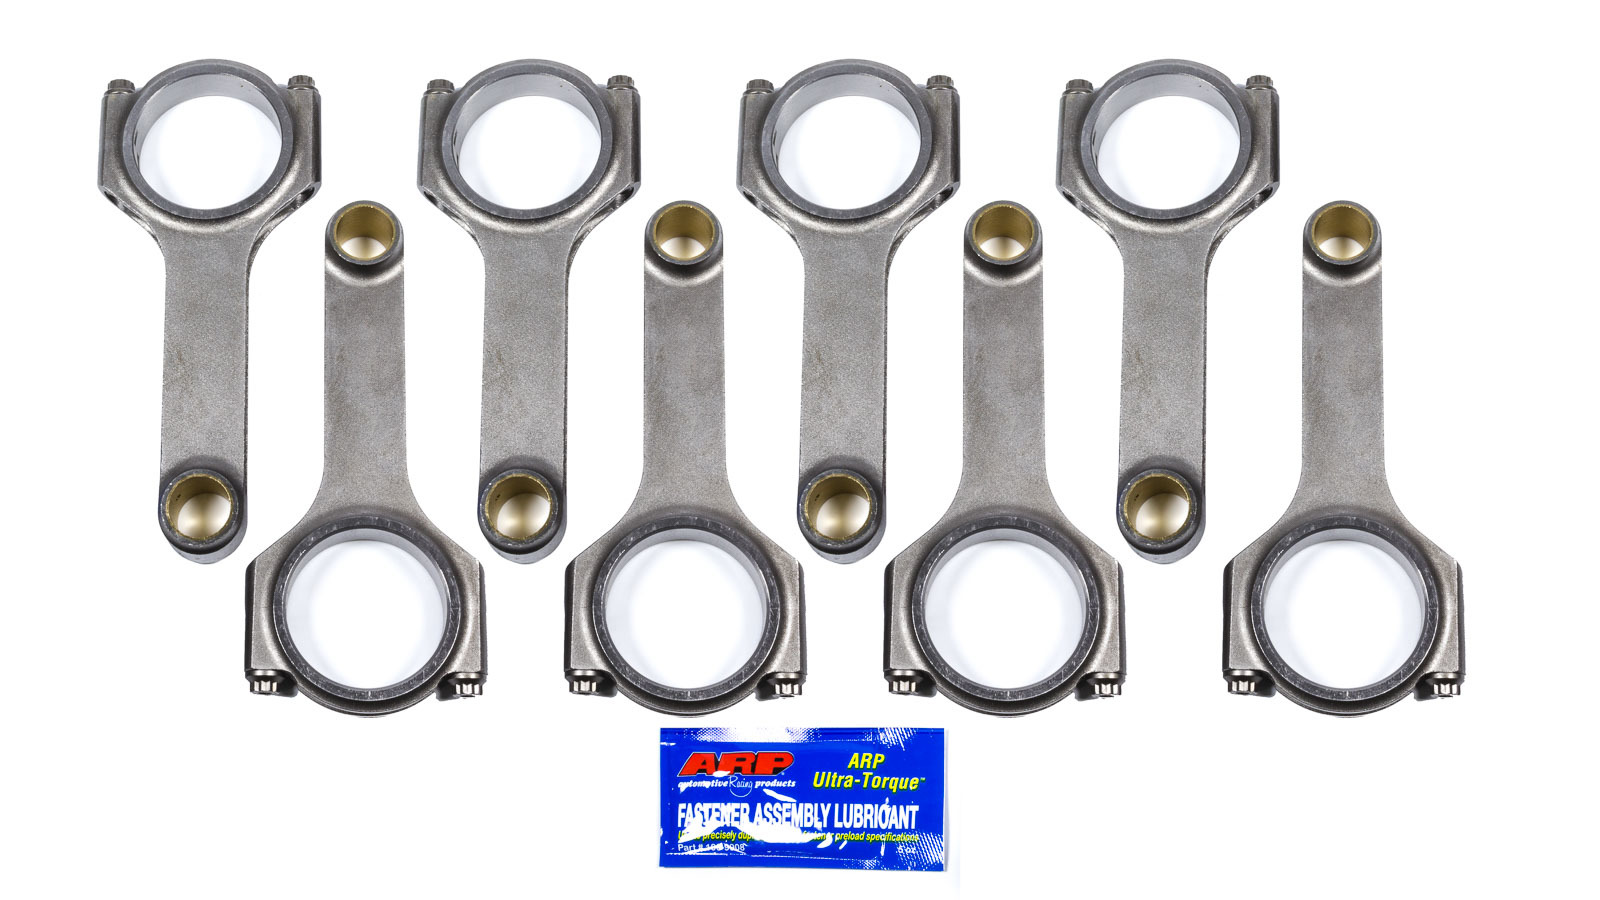 Scat 2-428-6490-2438-975 Connecting Rod, H Beam, 6.490 in Long, Bushed, 7/16 in Cap Screws, ARP8740, Forged Steel, Ford FE-Series, Set of 8